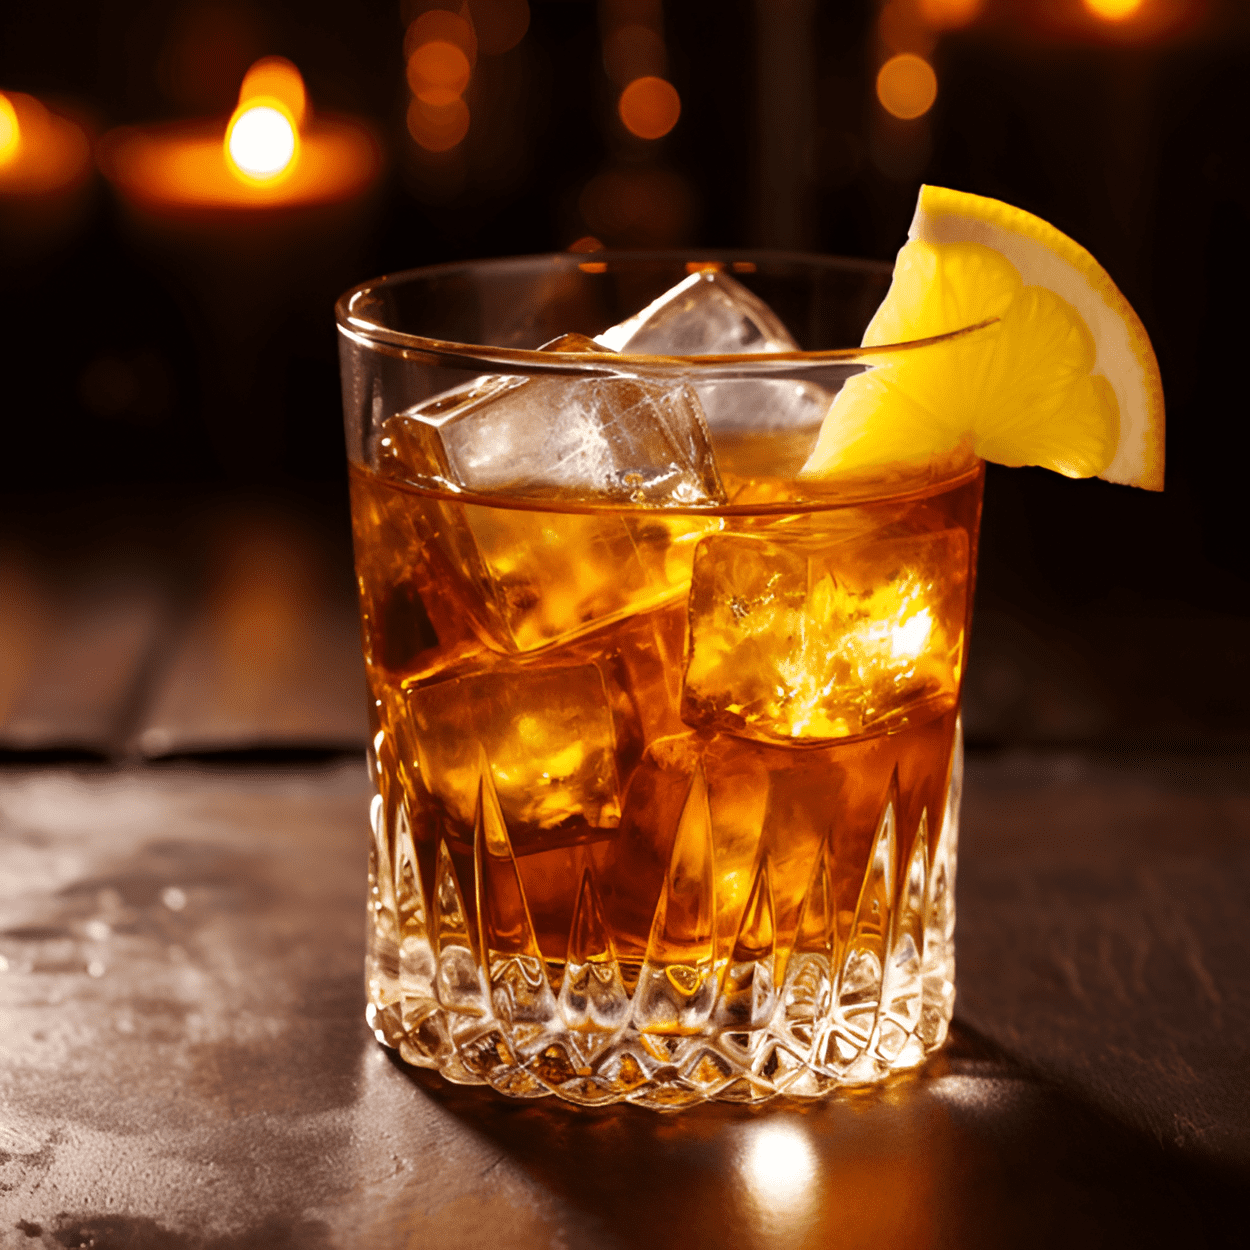 Nasty Woman Cocktail Recipe - The Nasty Woman cocktail is a potent mix of sweet and sour. The bourbon gives it a strong, robust flavor, while the lemon juice adds a tangy kick. The honey syrup brings a sweet balance, making this cocktail a delightful blend of contrasting flavors.